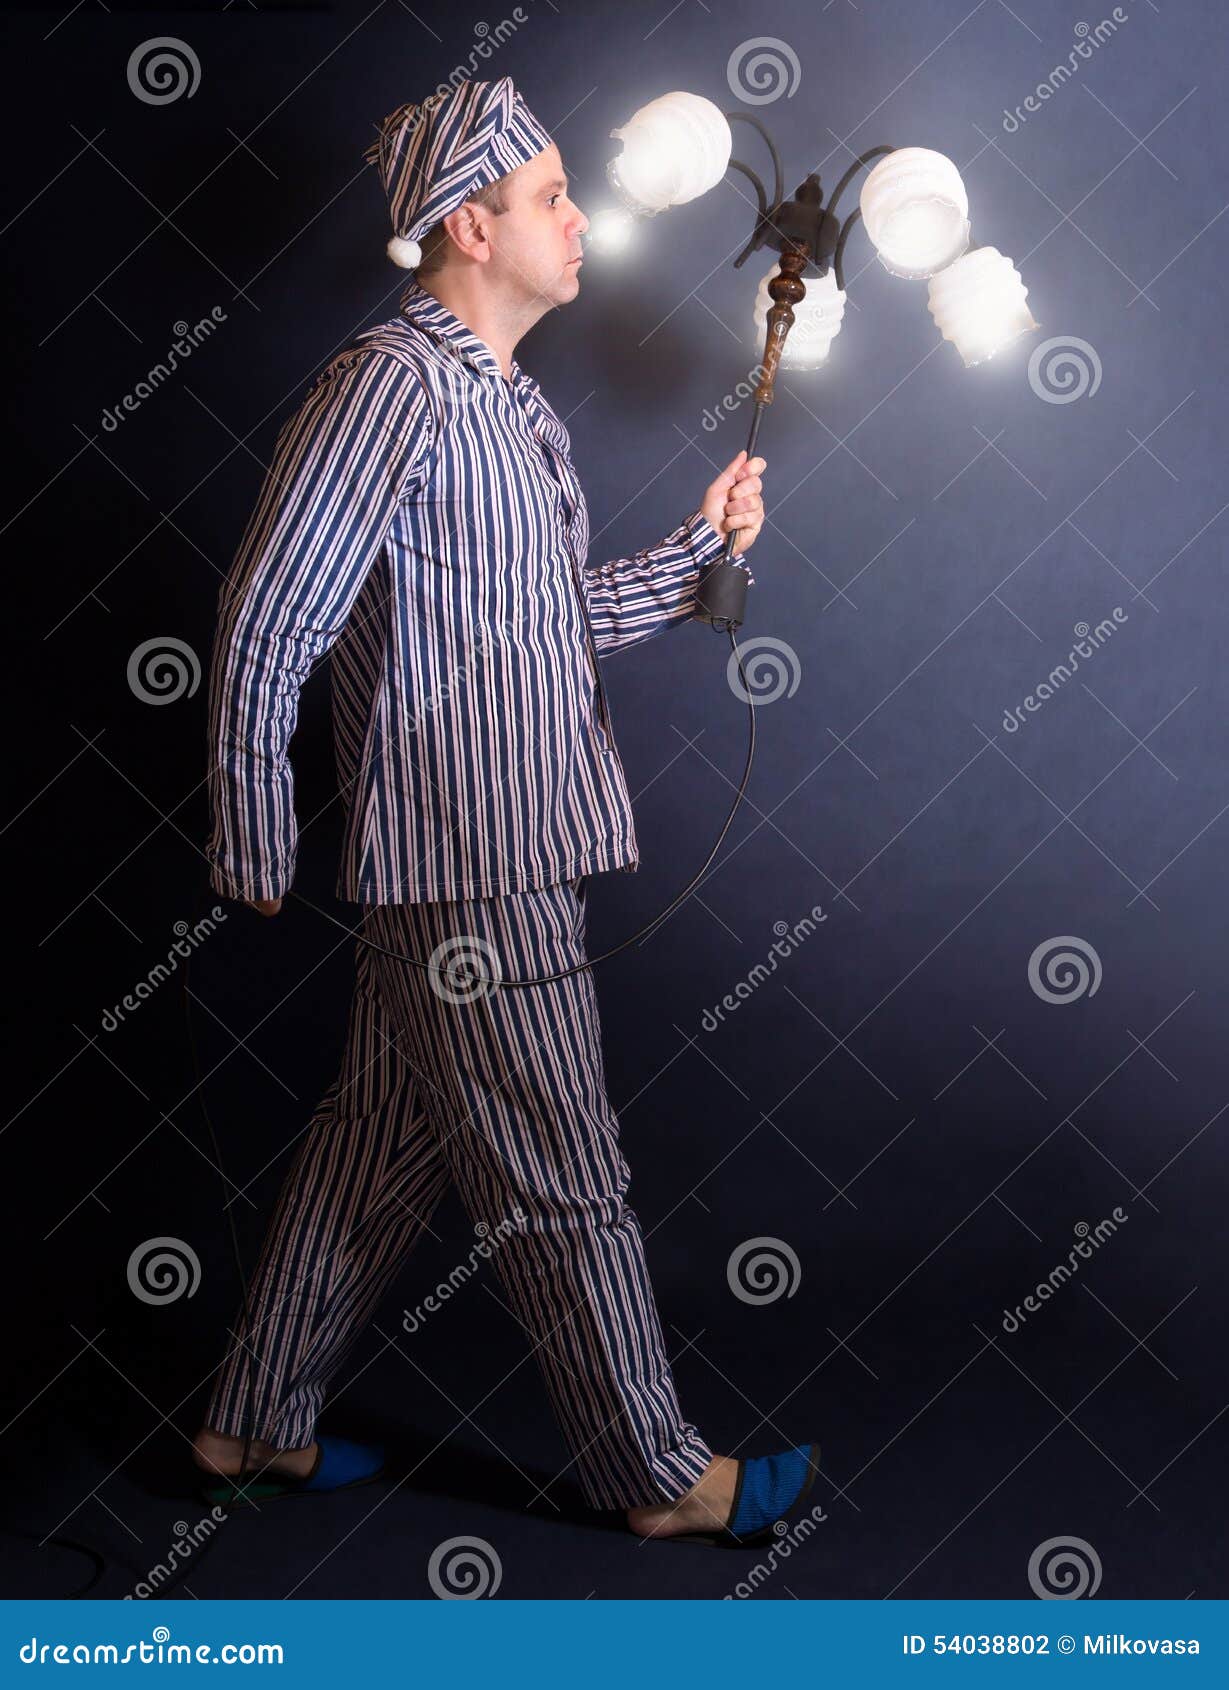 Man in Pajamas Carries Chandelier Stock Photo - Image of male, alone ...